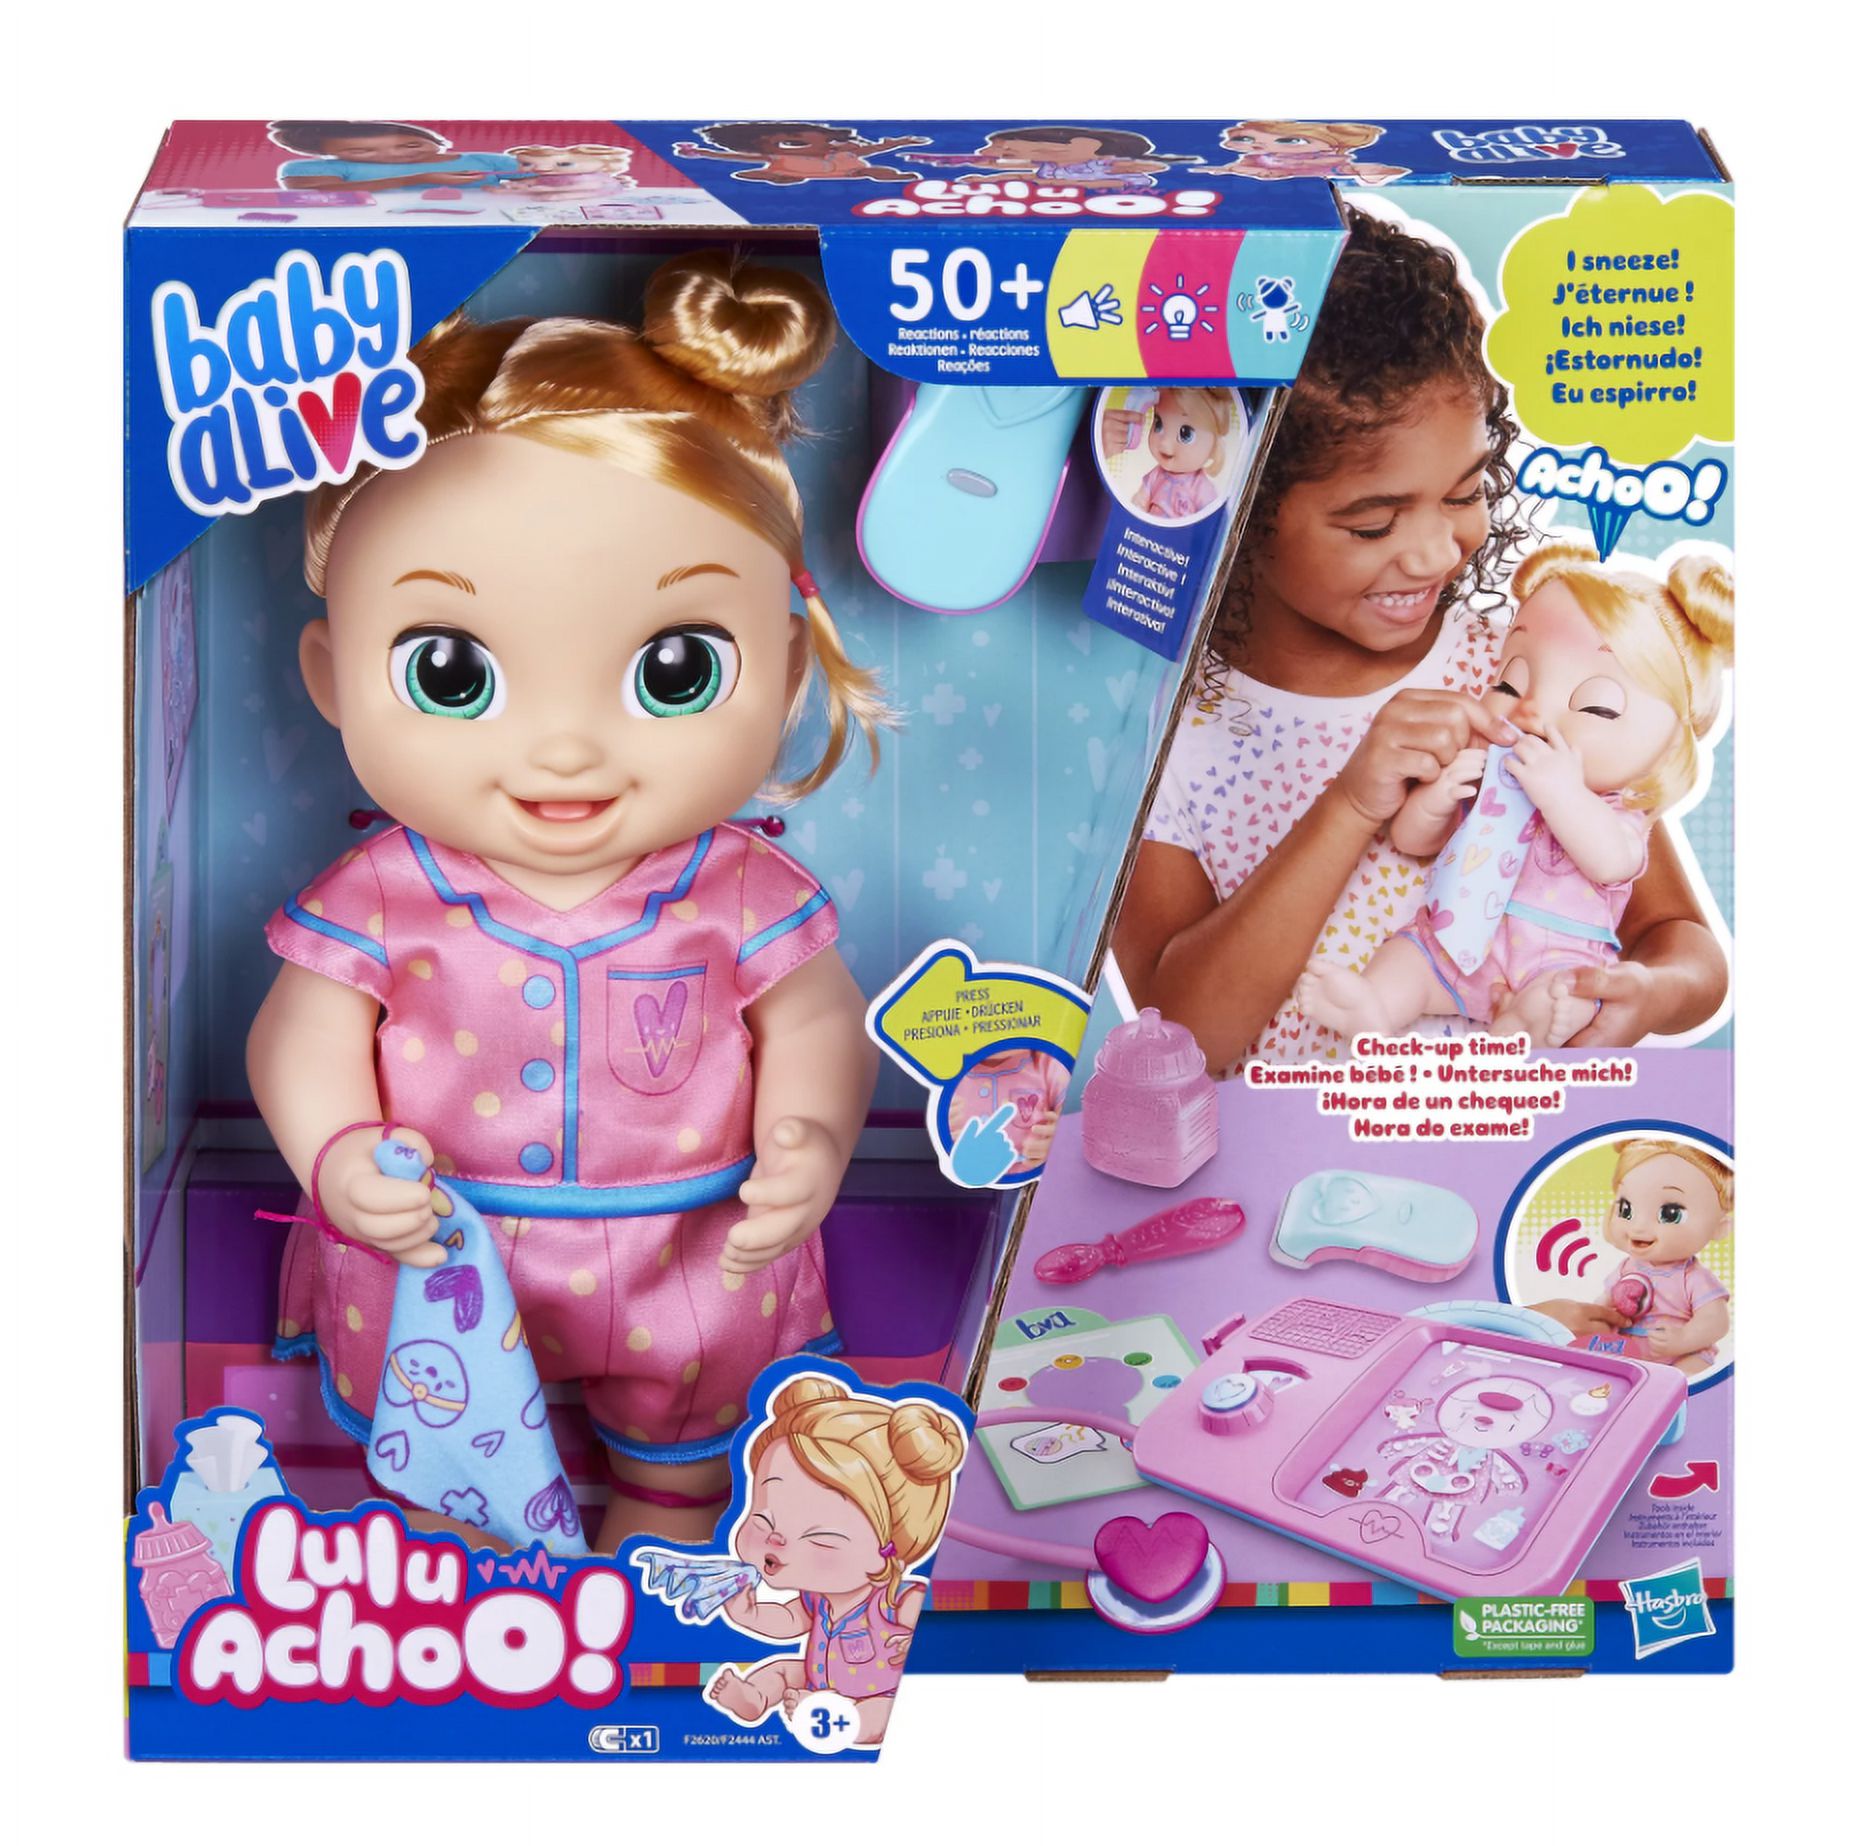 Baby Alive Lulu Achoo Doll with Blonde Hair, Doctor Play Toy - image 1 of 8